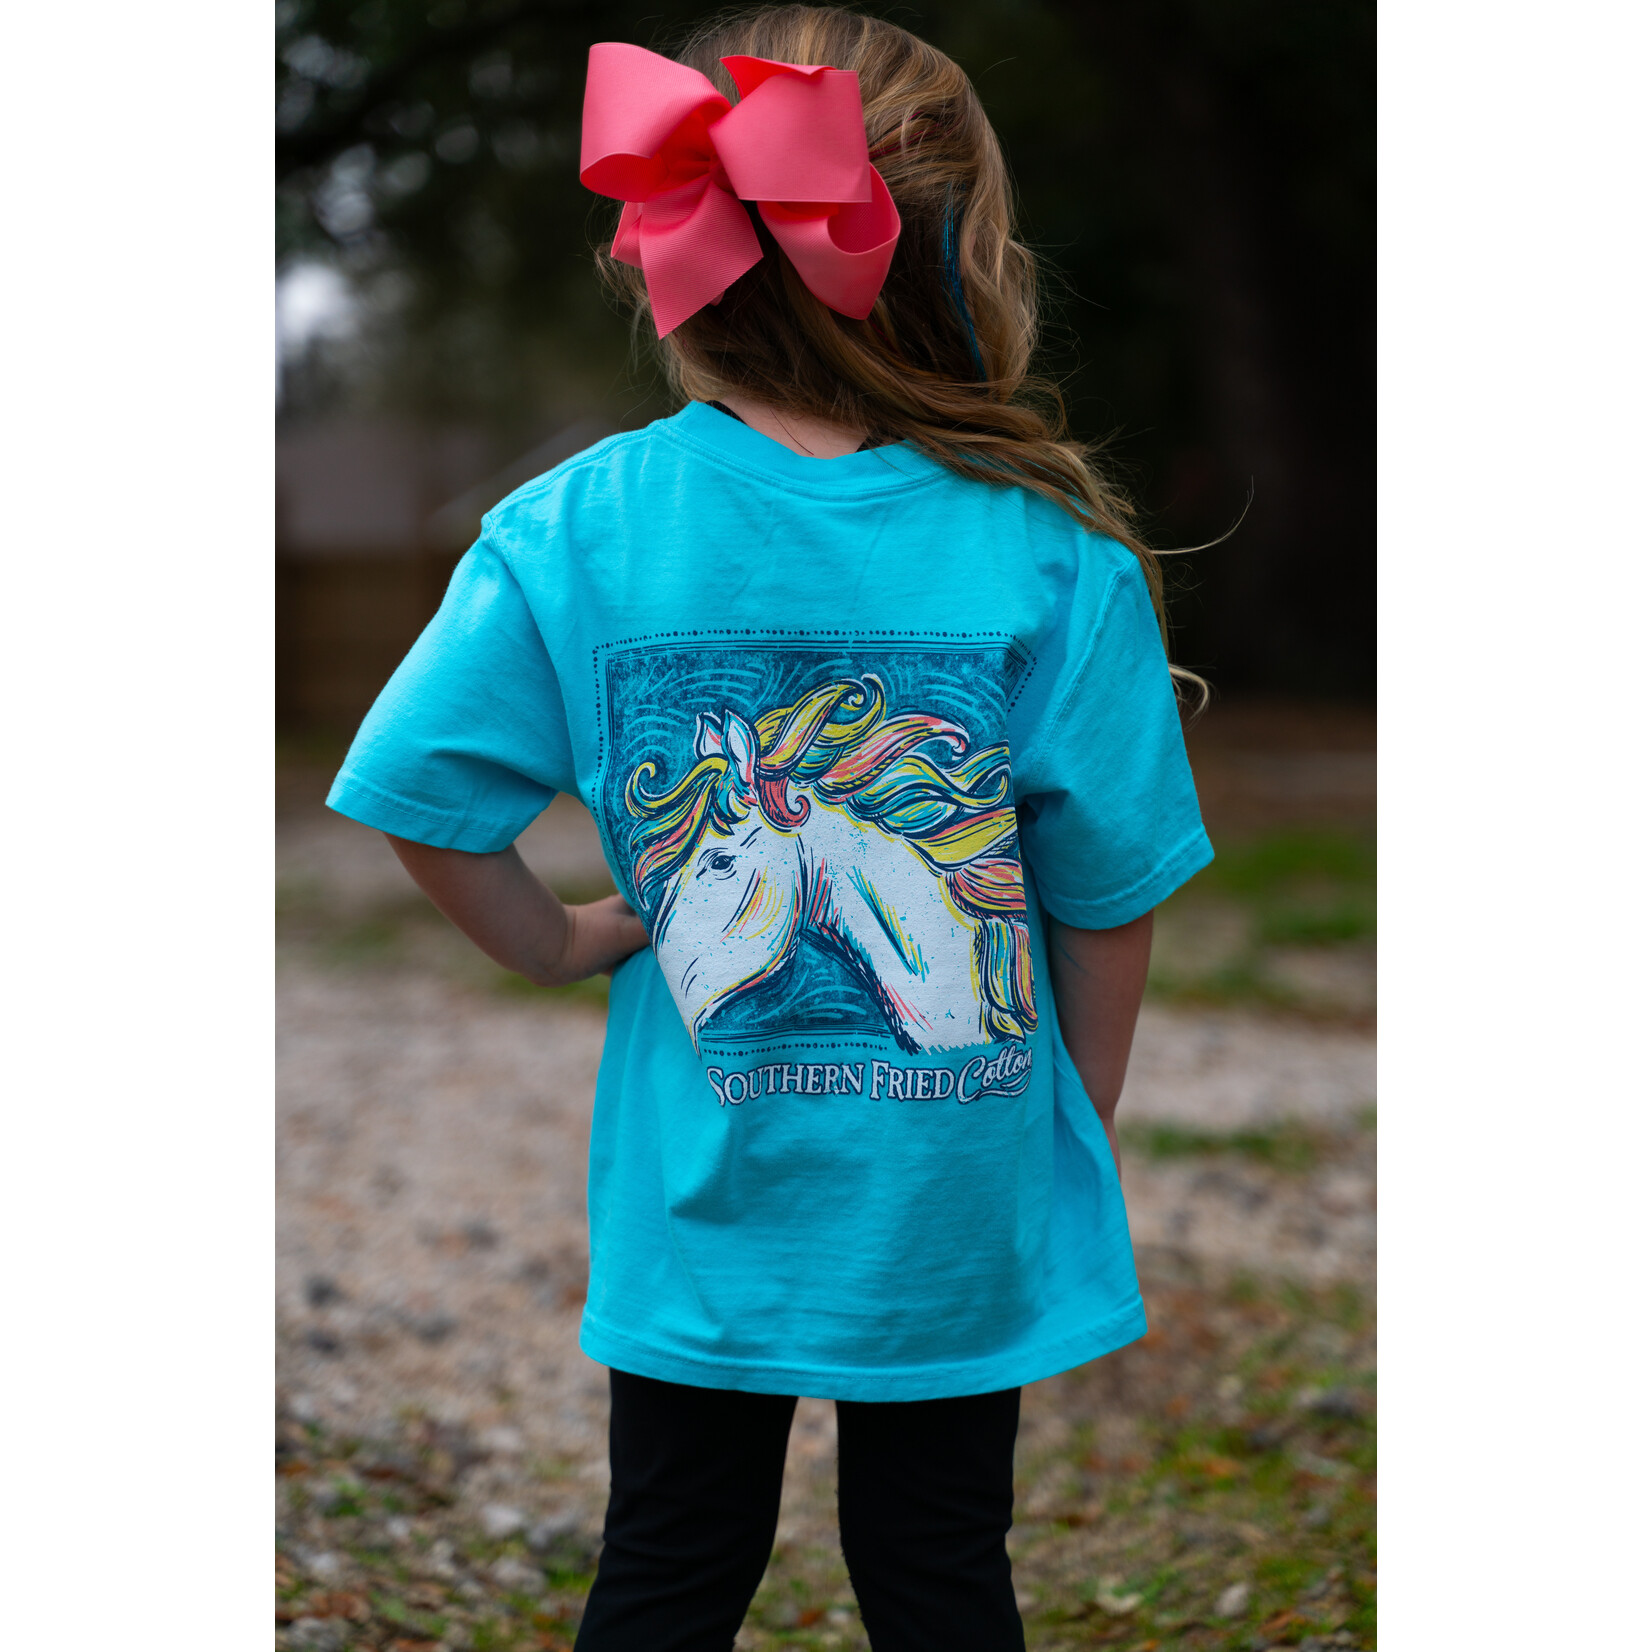 Southern Fried Cotton Southern Fried Cotton Youth Girl In the Wind S/S TEE Shirt